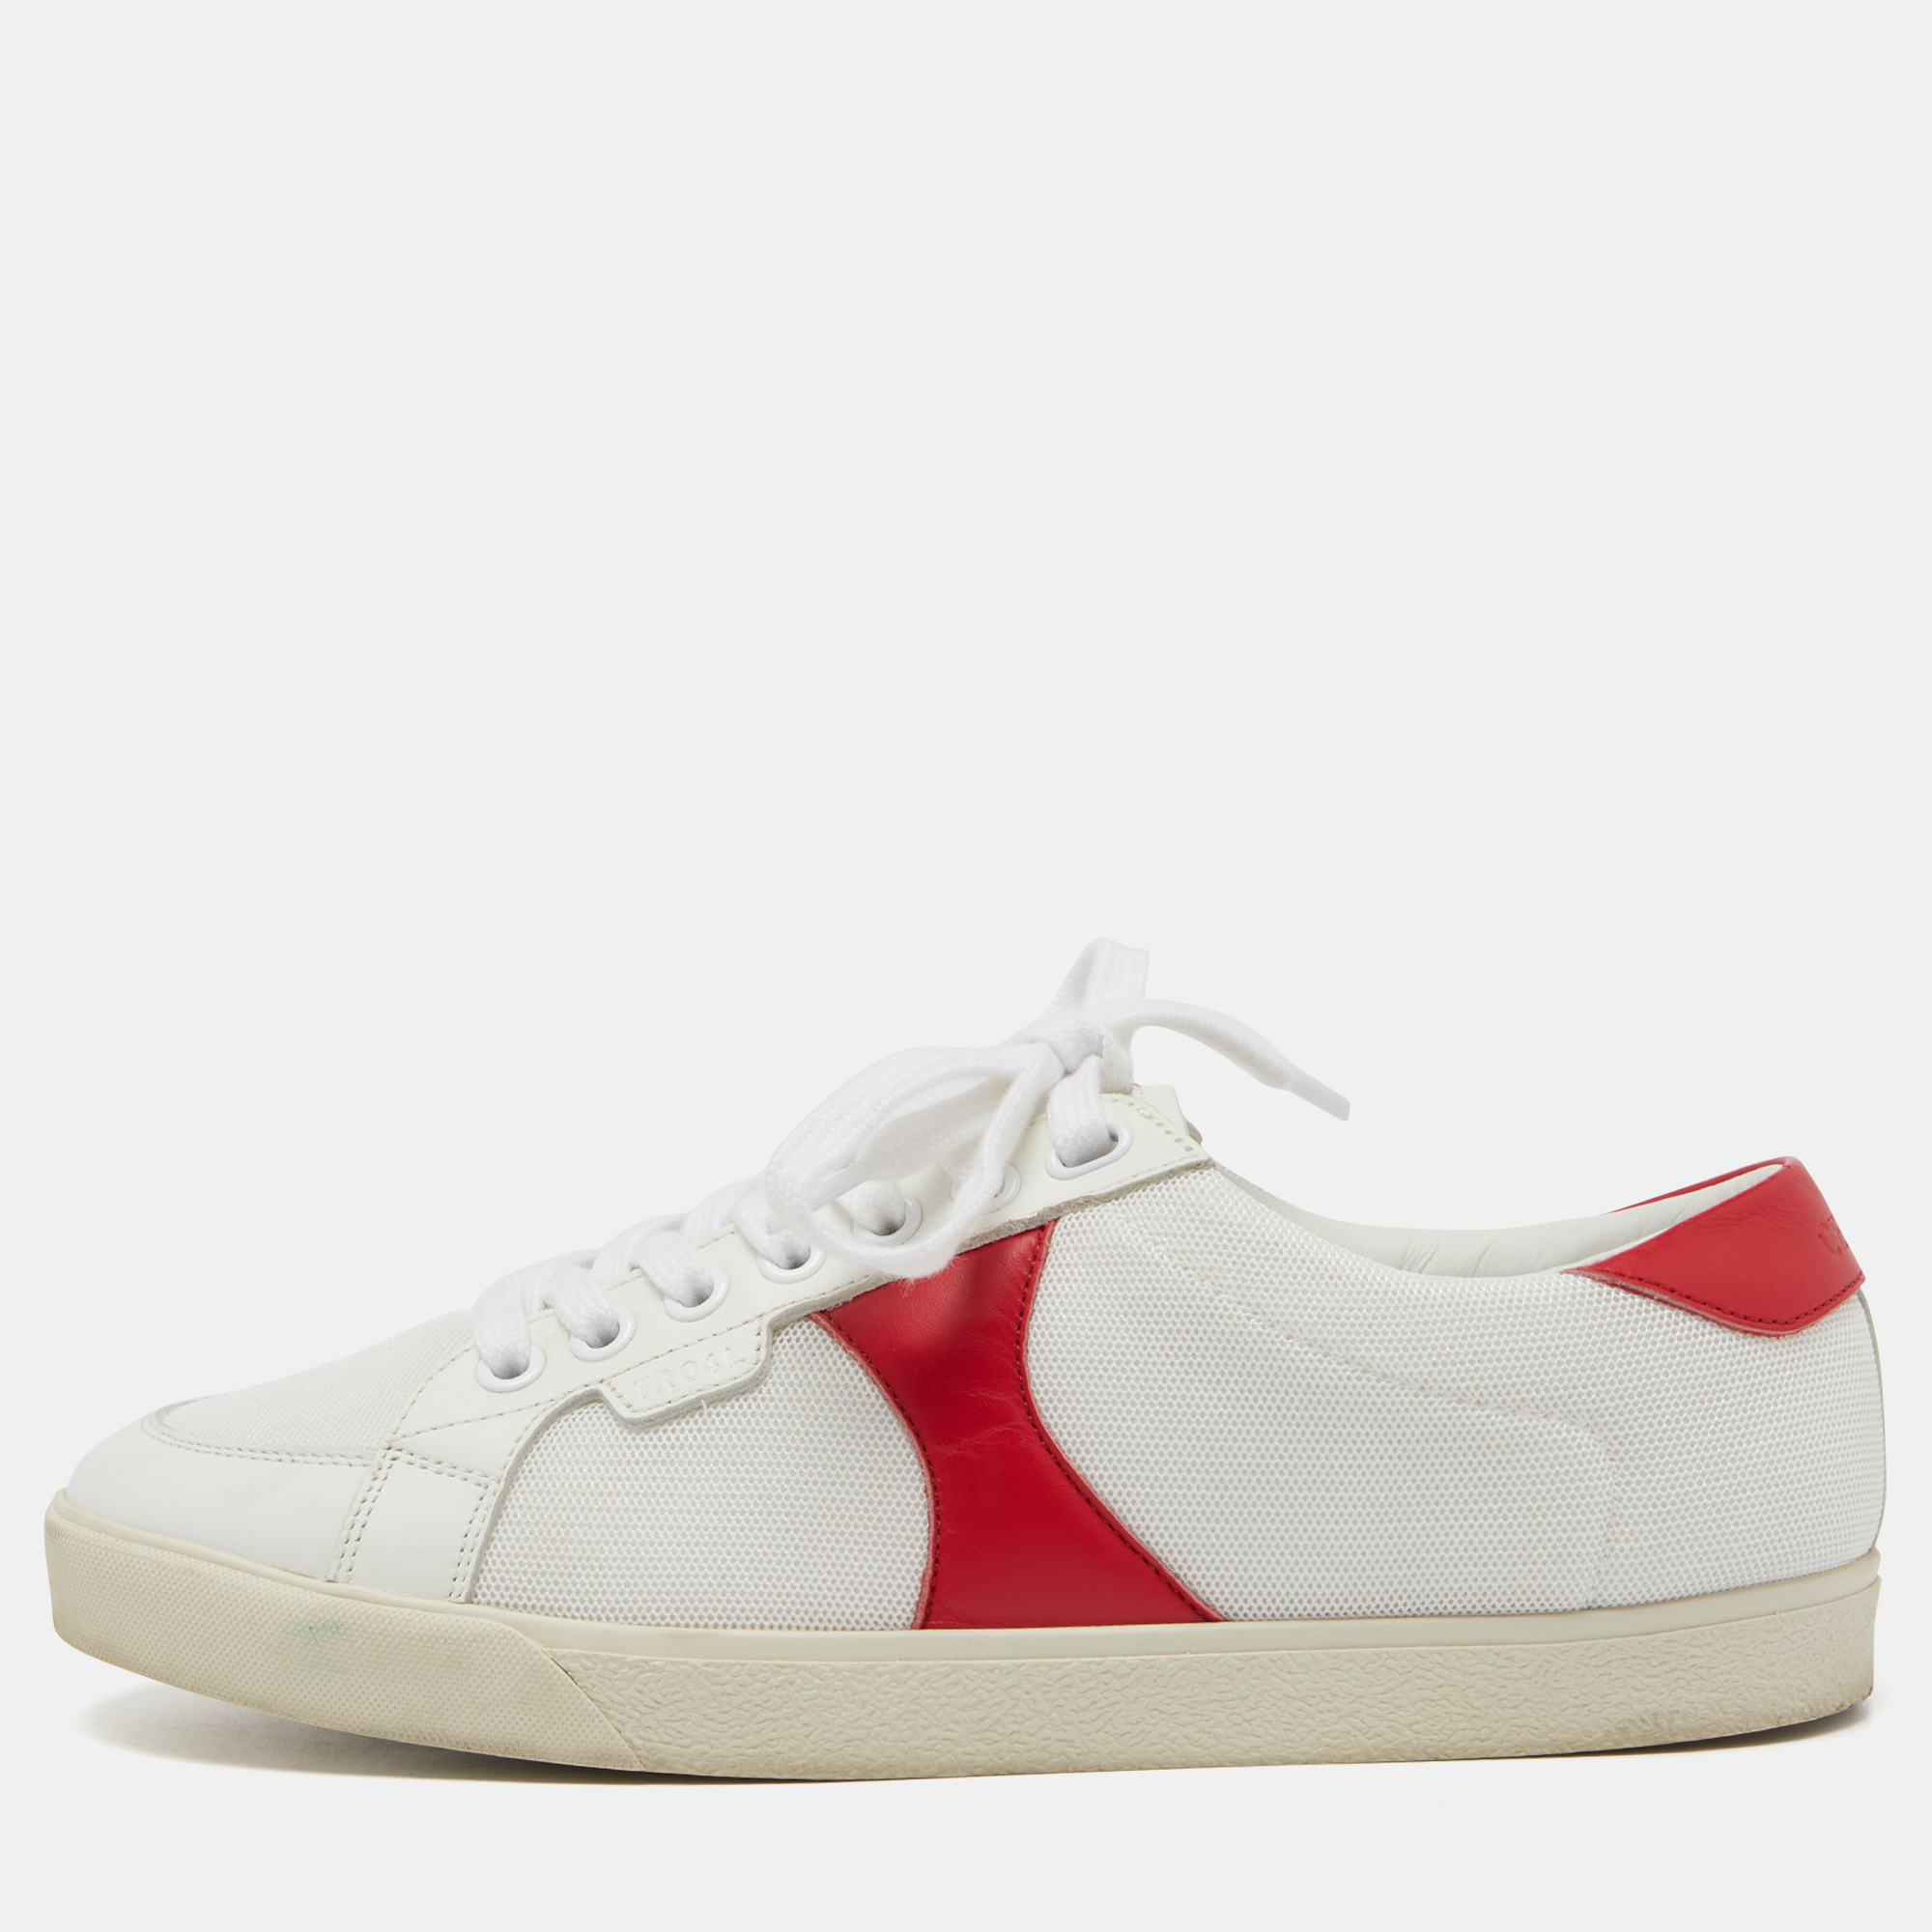 Celine White/Red Leather Colorblock Pattern Low Top Sneakers Size 37